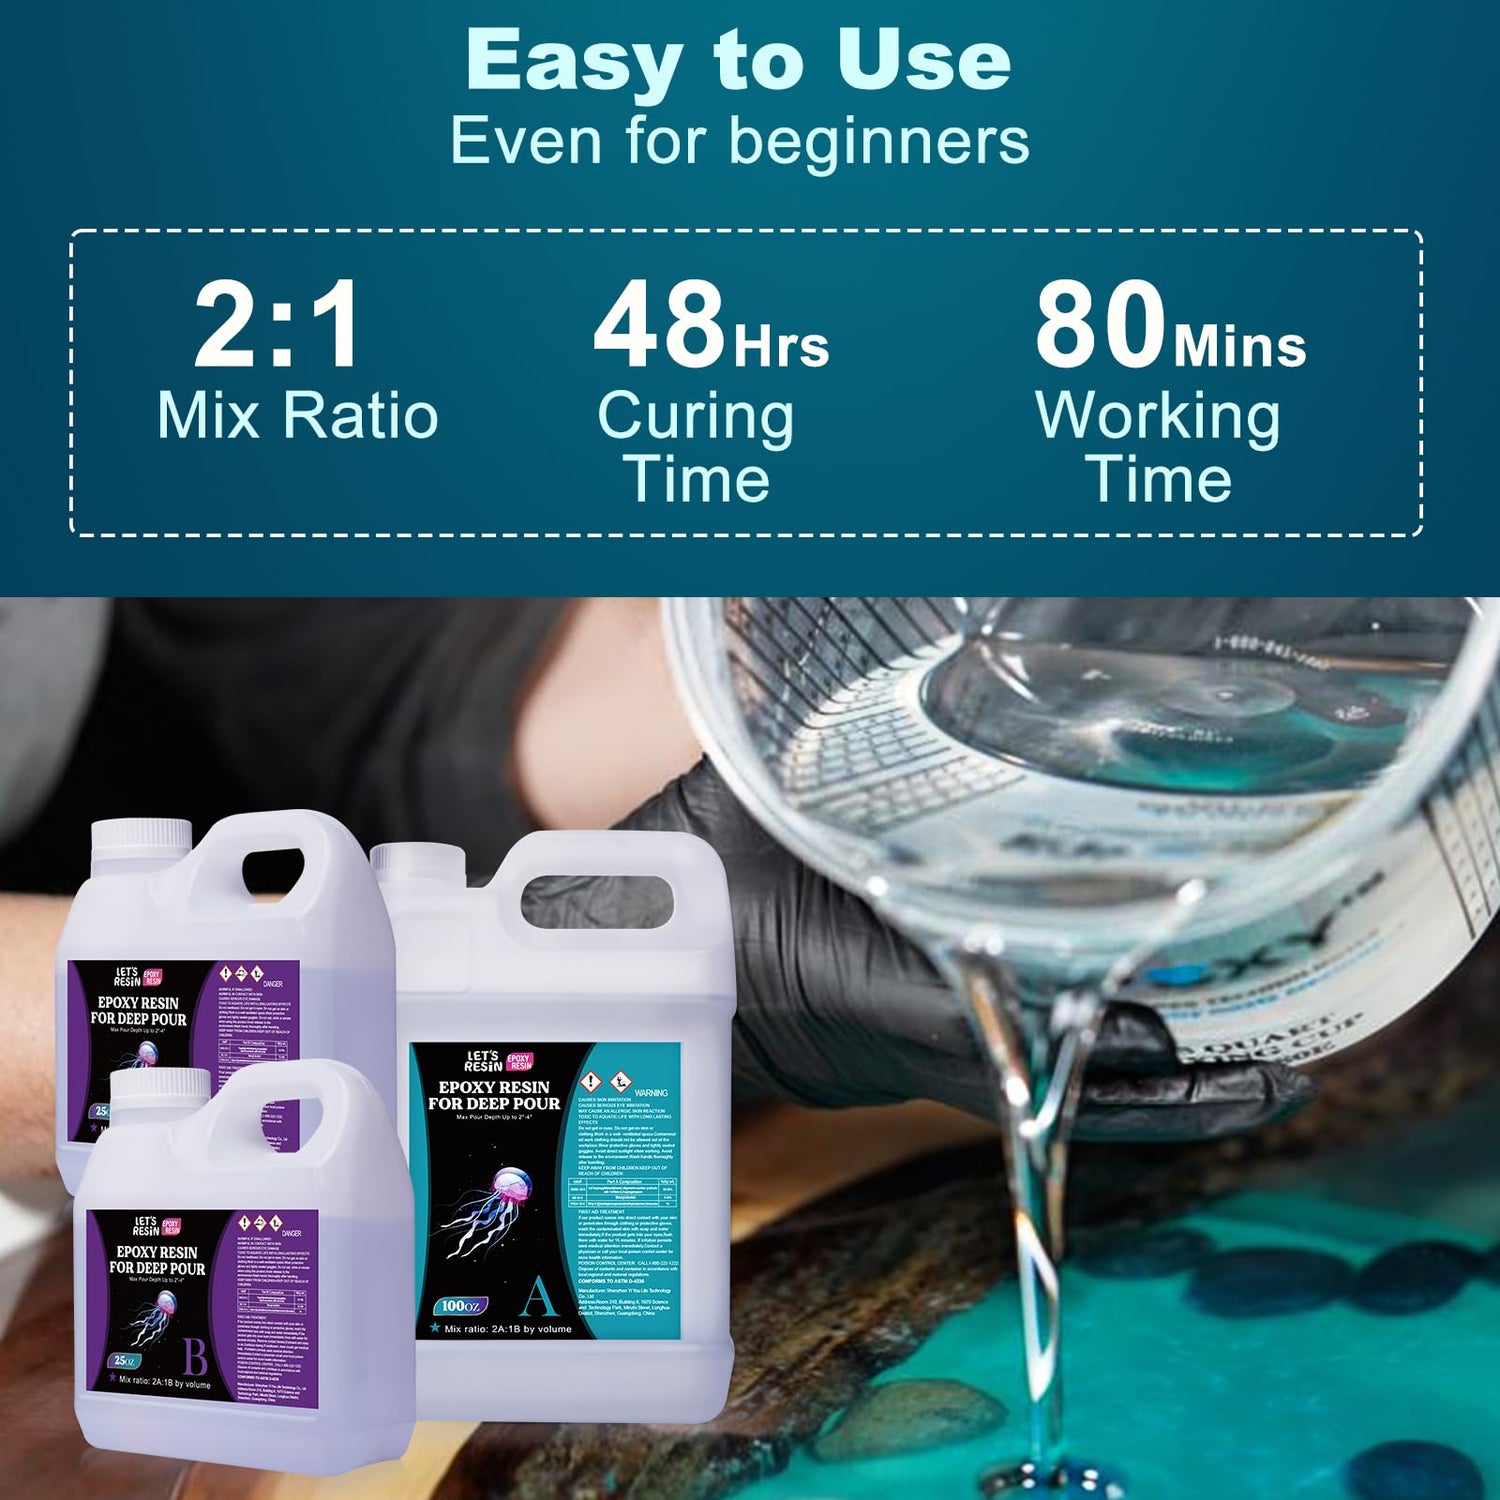 Epoxy resin which is easy to use, even for beginners